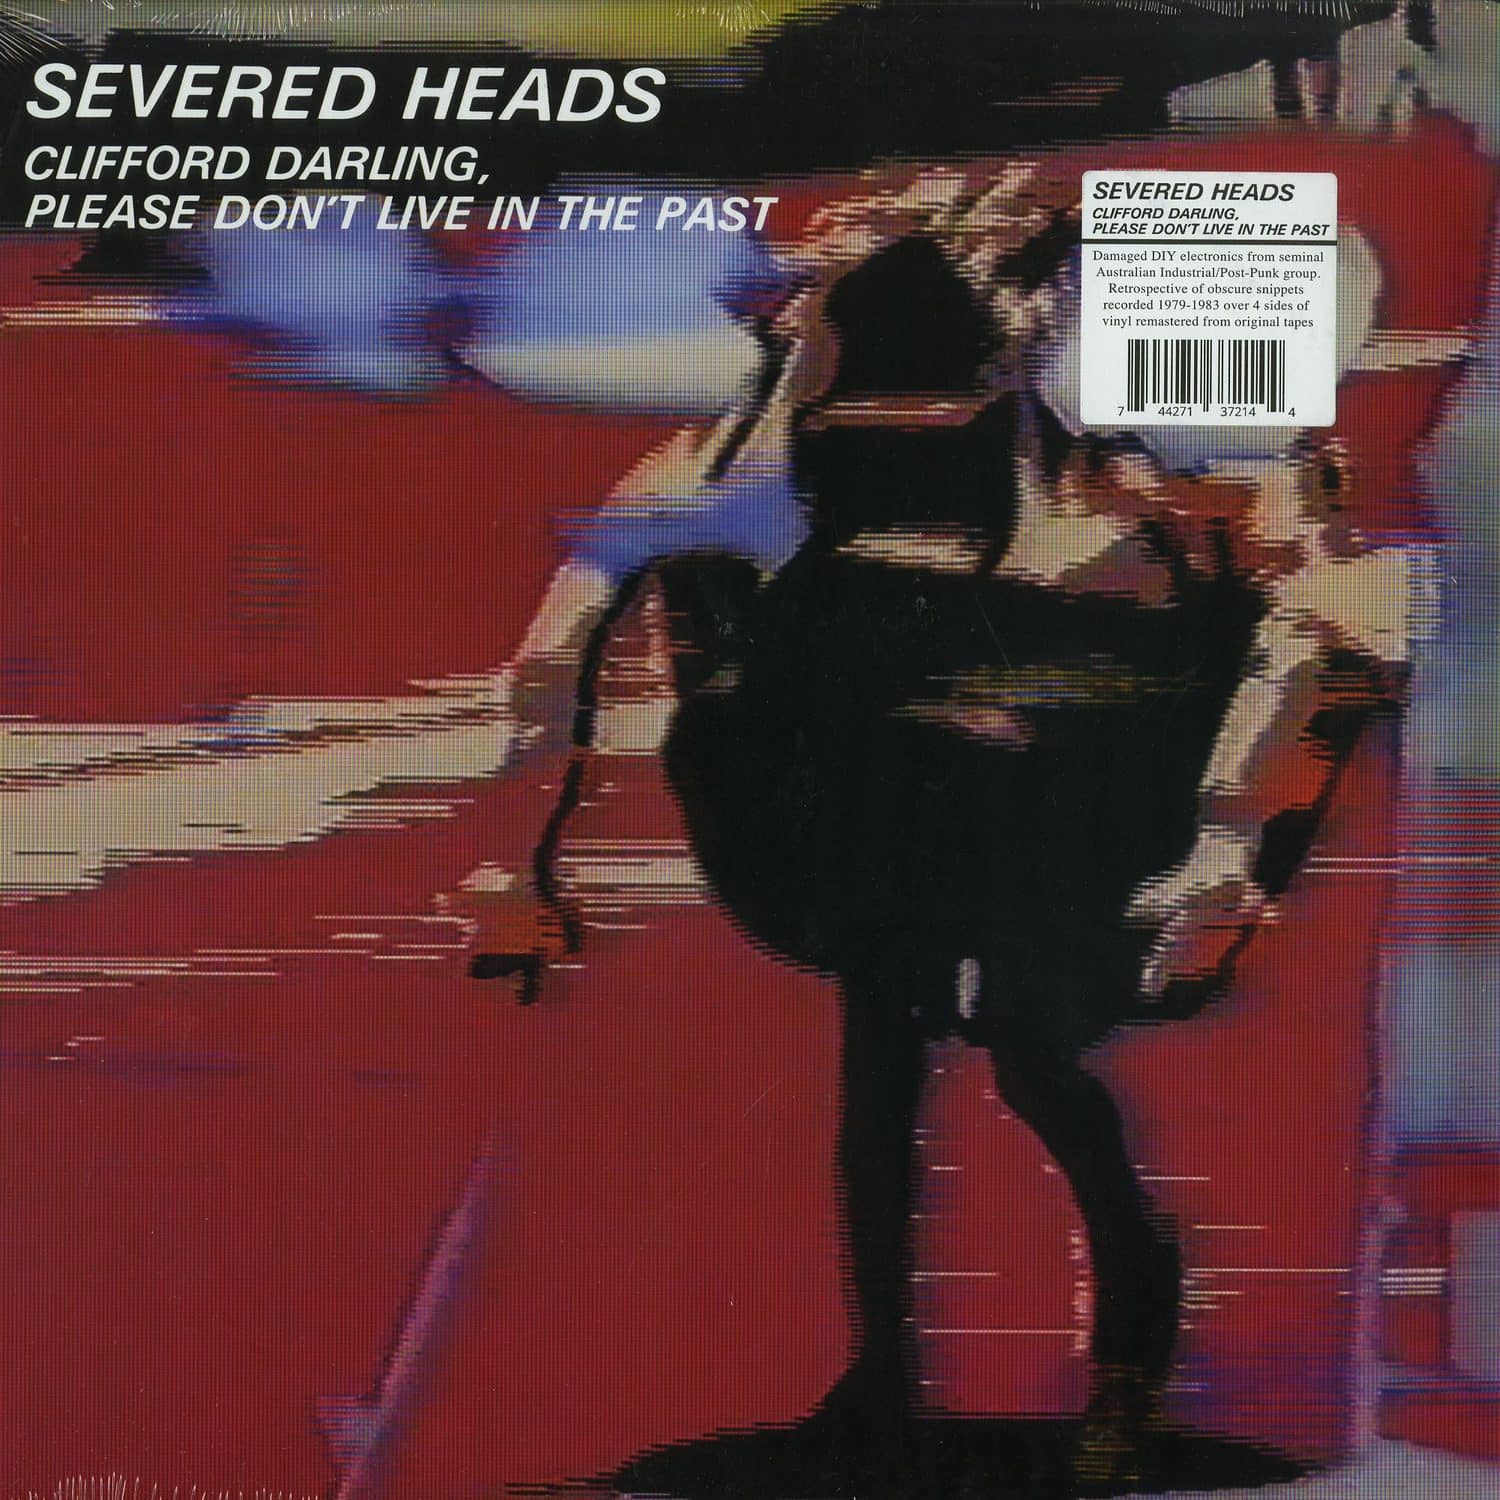 Severed Heads - PLEASE CLIFFORD, DONT LIVE IN THE PAST 